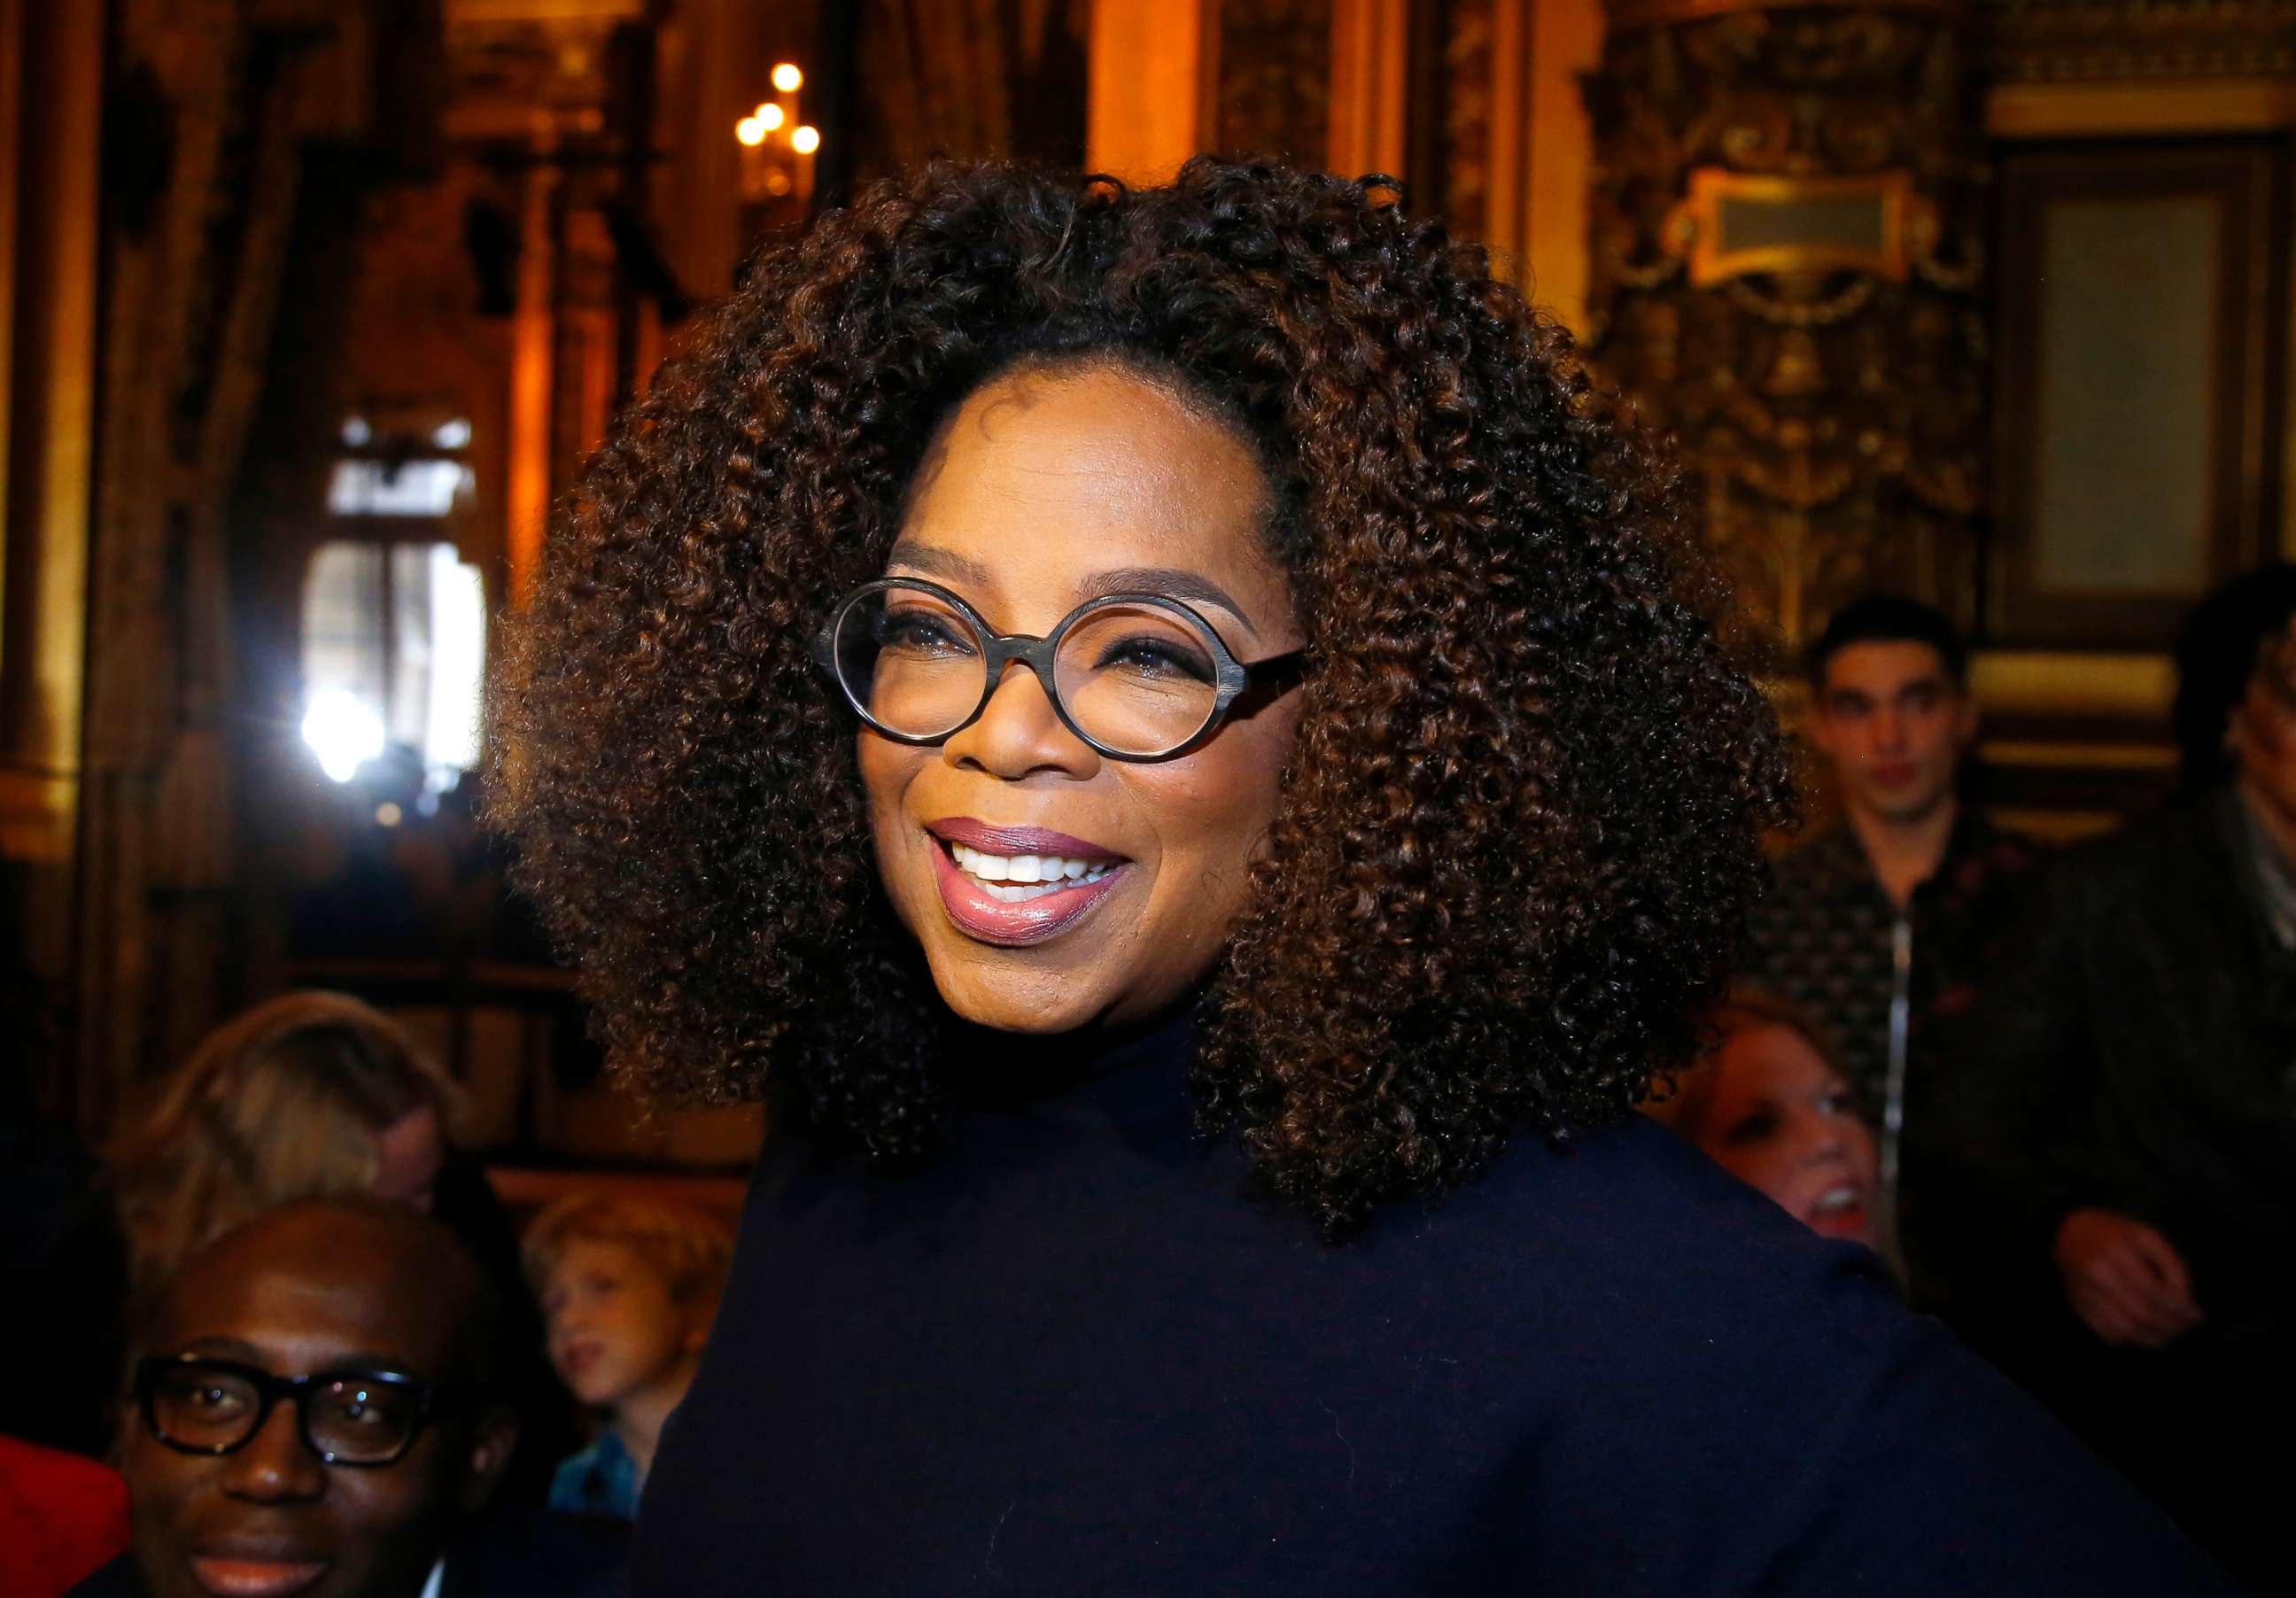 PHOTO: Oprah Winfrey attends the presentation of Stella McCartney's ready-to-wear Fall-Winter 2019-2020 fashion collection in Paris, March 4, 2019.